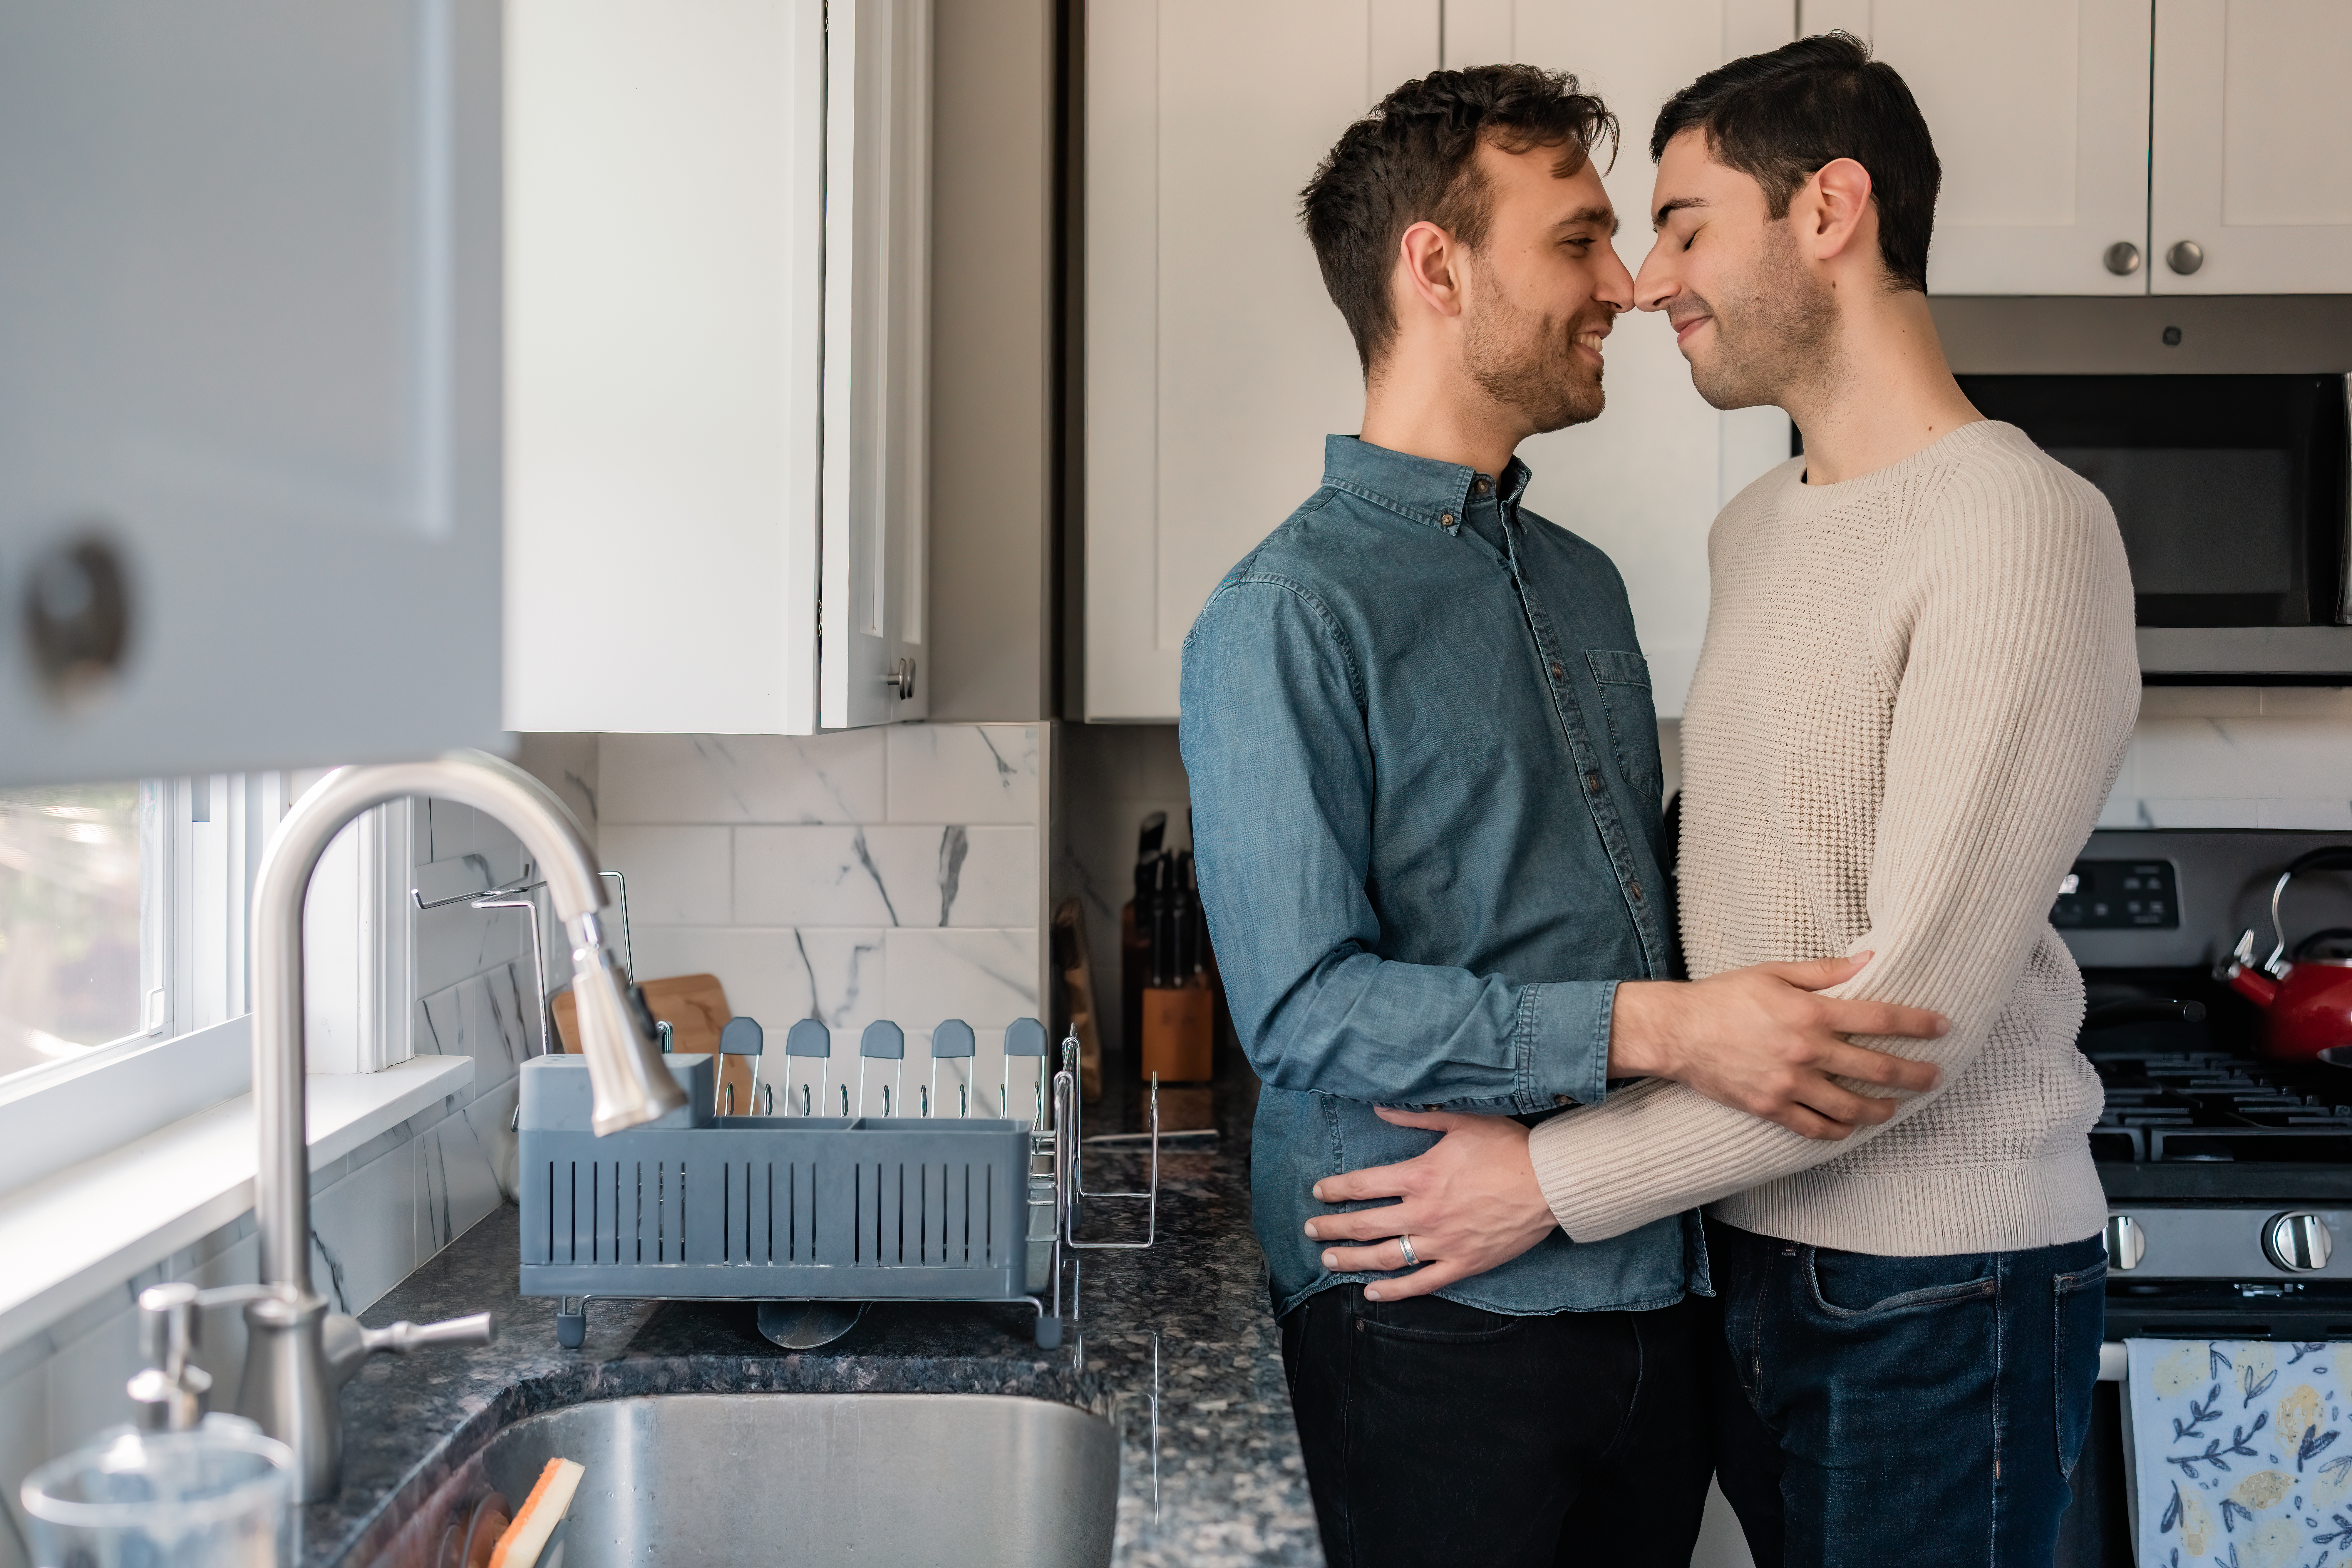 New Jersey Wedding Photographer, New Jersey Engagement Session, NJ Engagement Session, North Jersey Wedding Photographer, New Jersey Wedding Venues, NJ Wedding Photographer, Unique Wedding Ideas, LGBTQ Engaged Couple, Modern Wedding Couple, Wedding Inspiration, Wedding Planning, Engaged LGBTQ Couple in New Jersey smiling while nose to nose as they are hanging out in the kitchen at their house